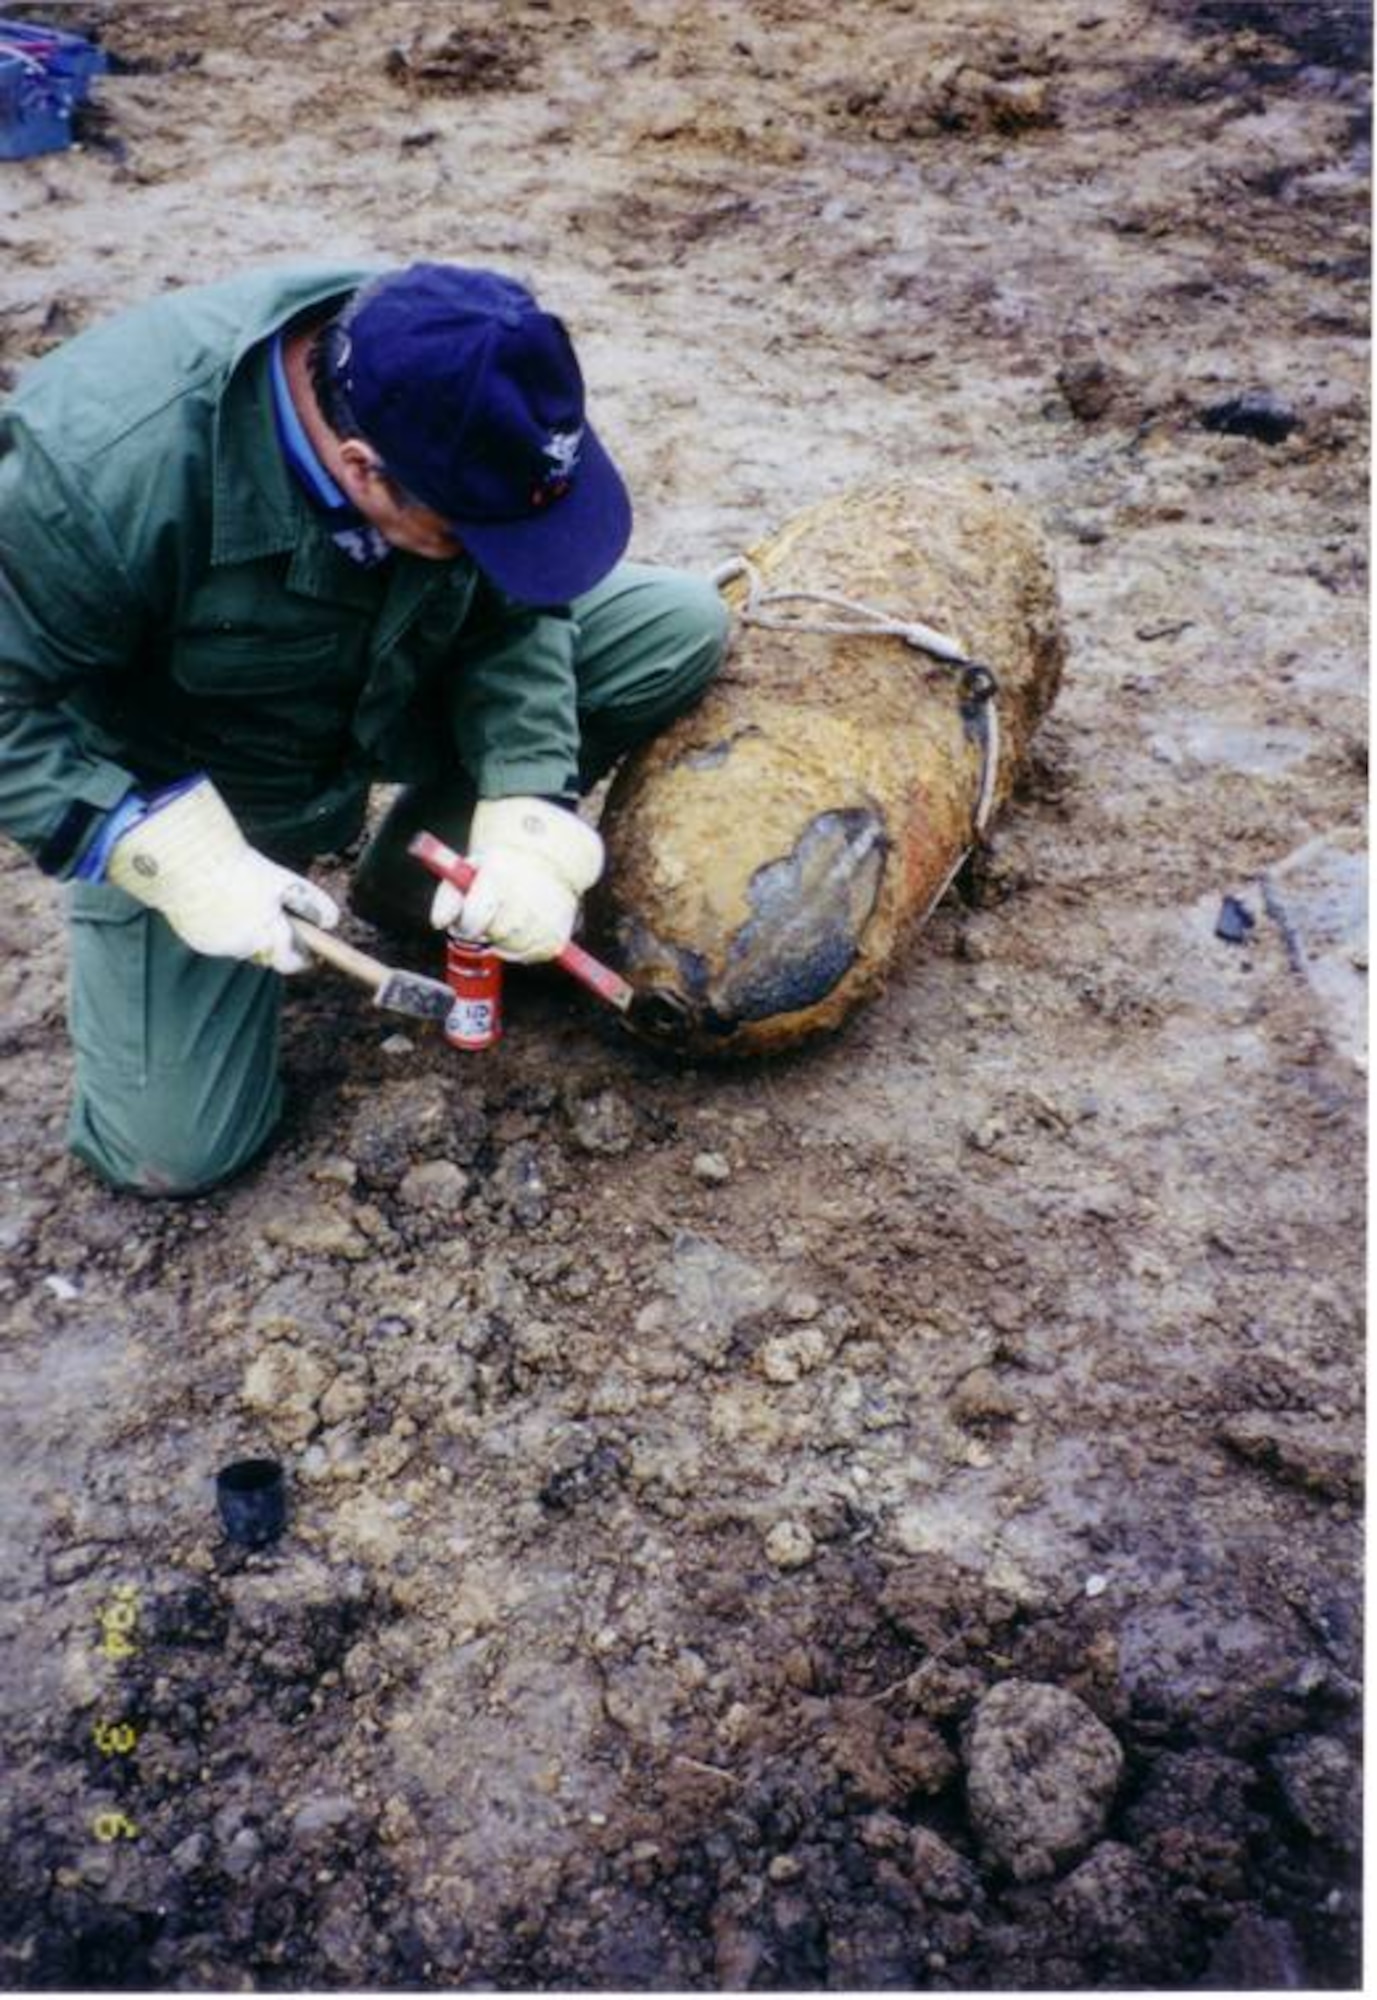 An unexploded ordnance disposal expert works to defuse a World War II 500-pound bomb dropped on Germany during the war. (Courtesy photo)